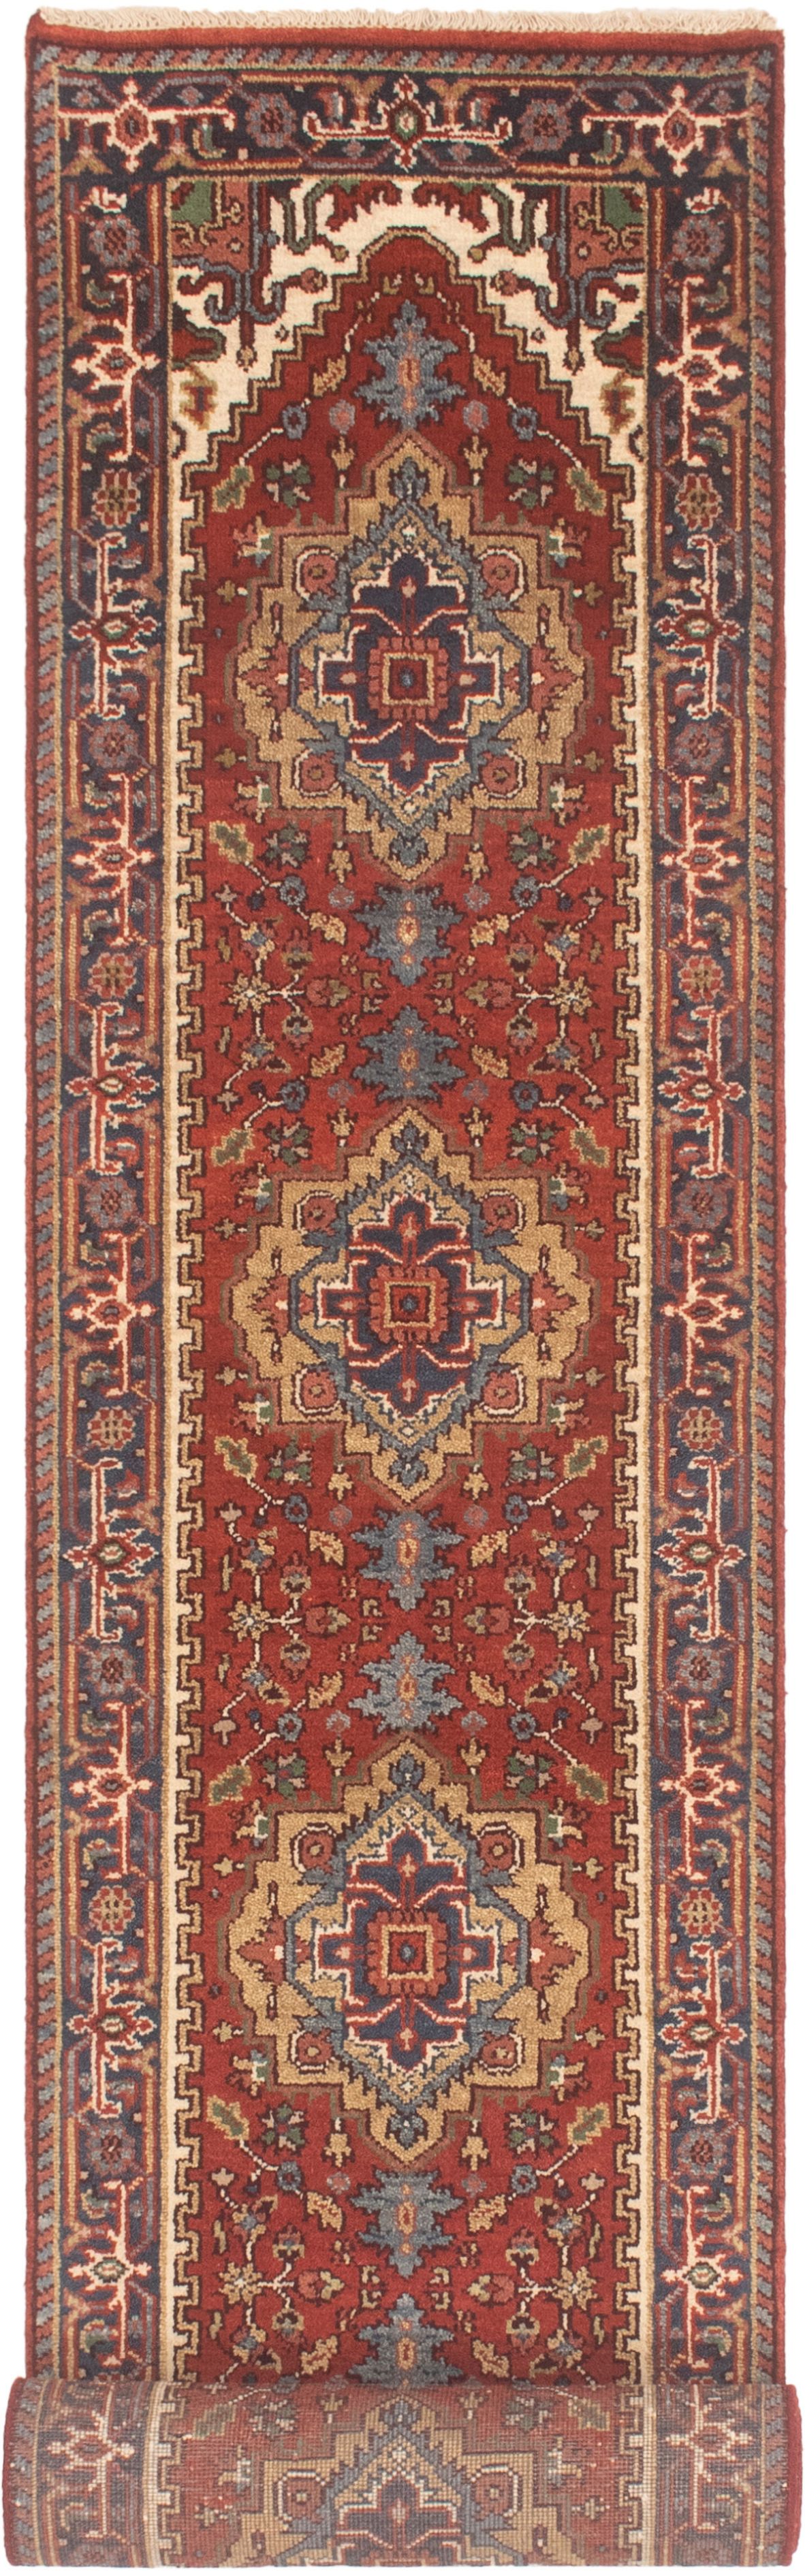 Hand-knotted Serapi Heritage Dark Copper Wool Rug 2'6" x 15'8"  Size: 2'6" x 15'8"  